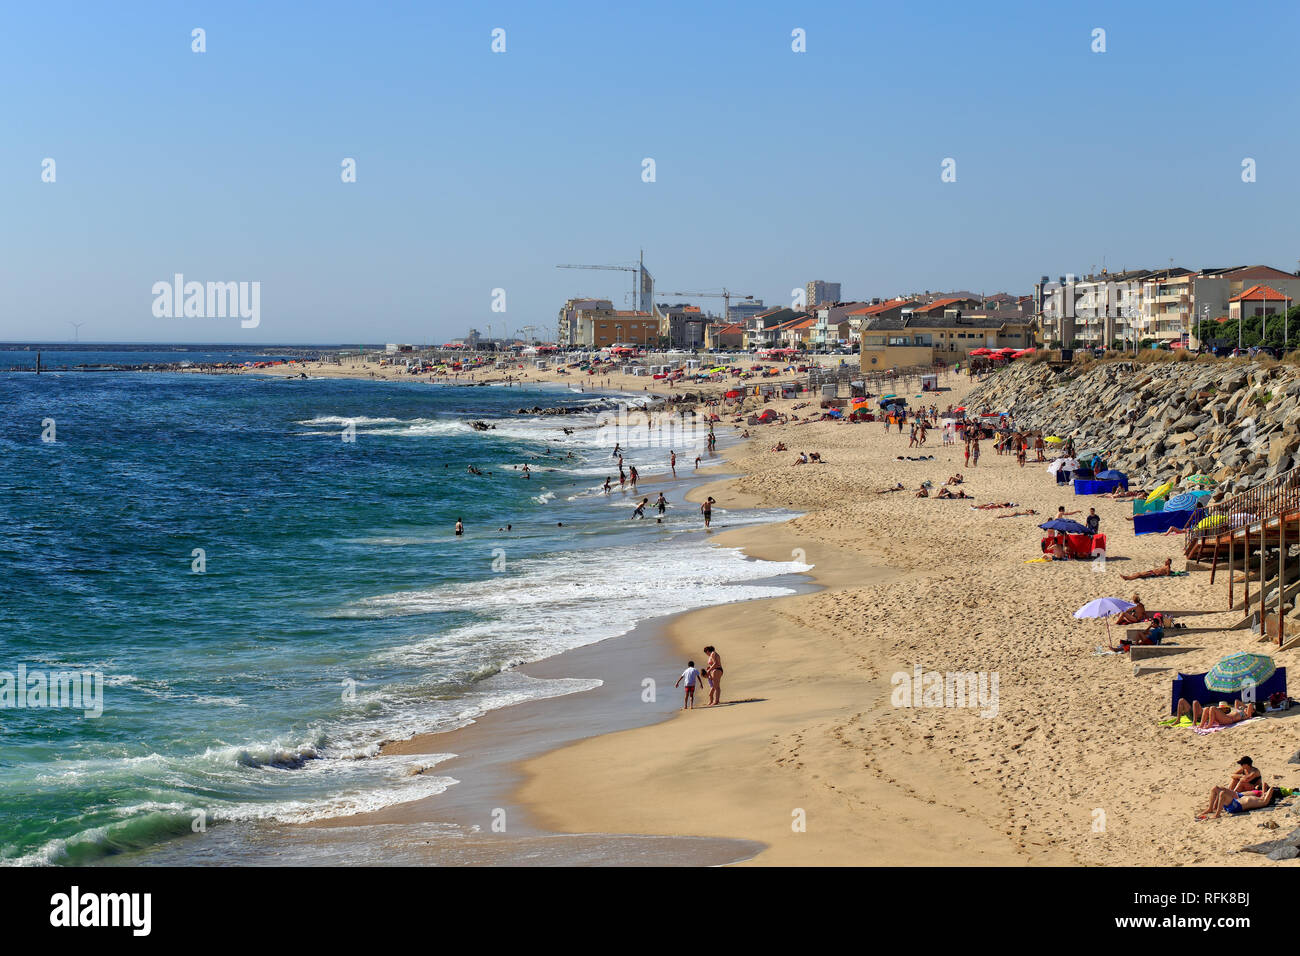 Vila do Conde, Portugal - June 19, 2015: Wide view of Vila do Conde Beach at the start of the bathing season, north of Portugal Stock Photo